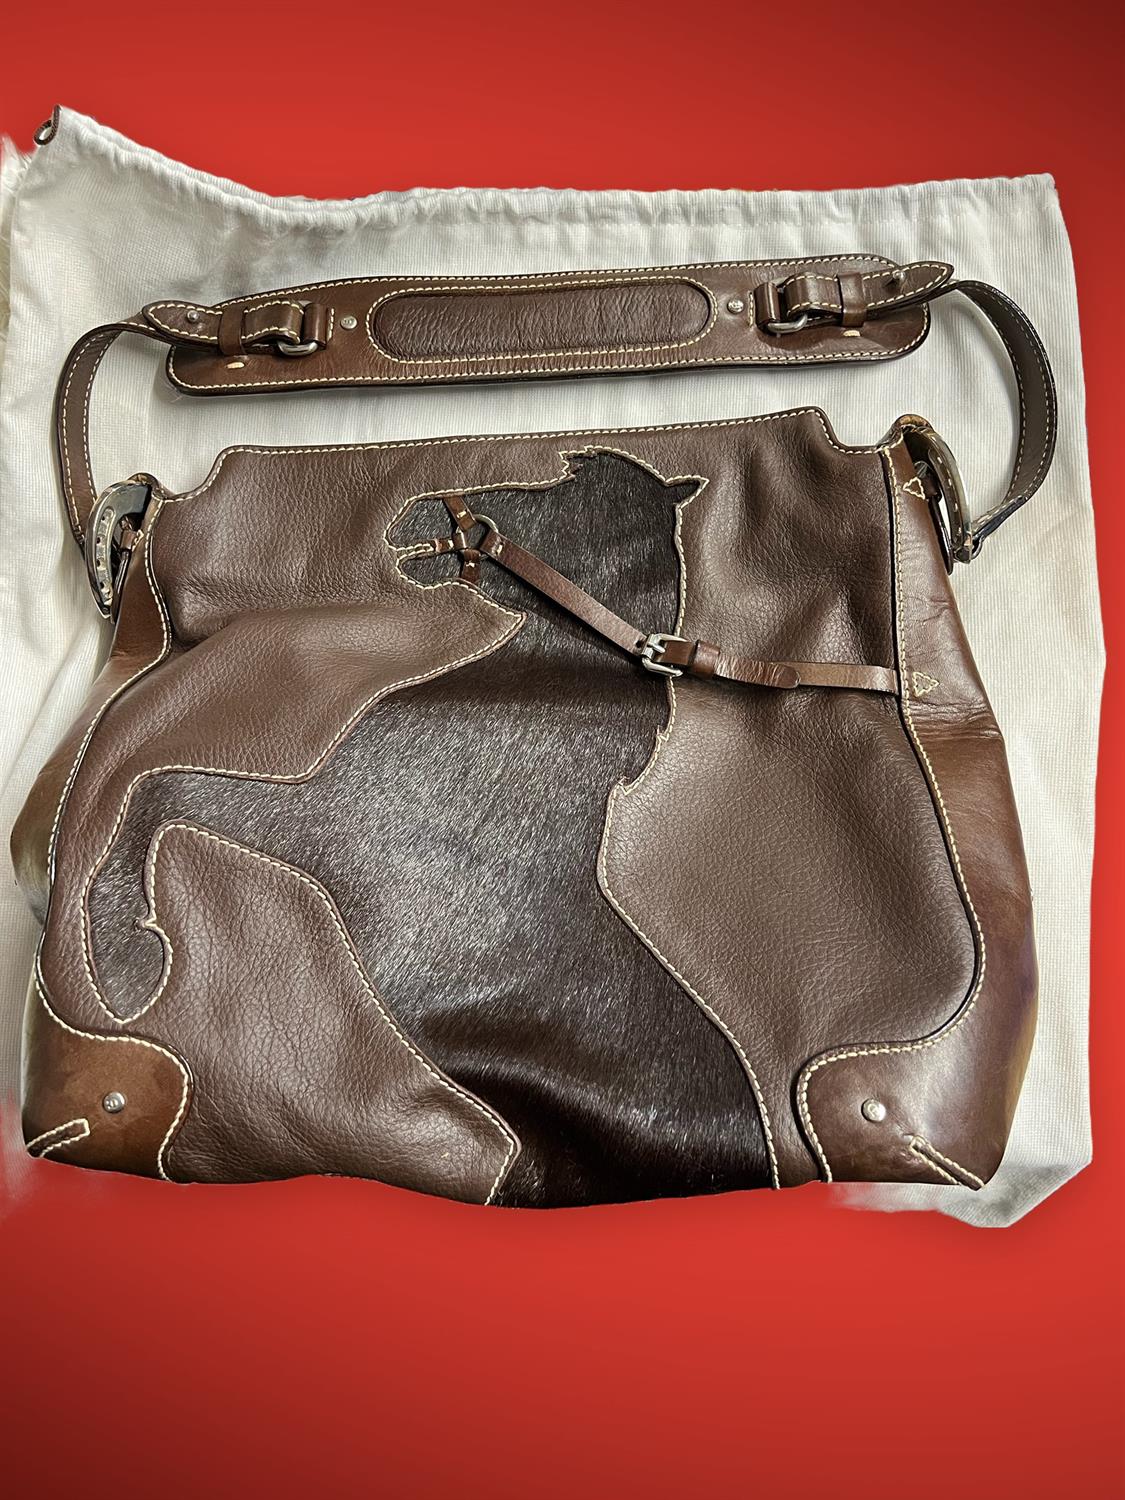 AIGNER chocolate brown leather and pony-skin large equestrian themed top-handle handbag with silver